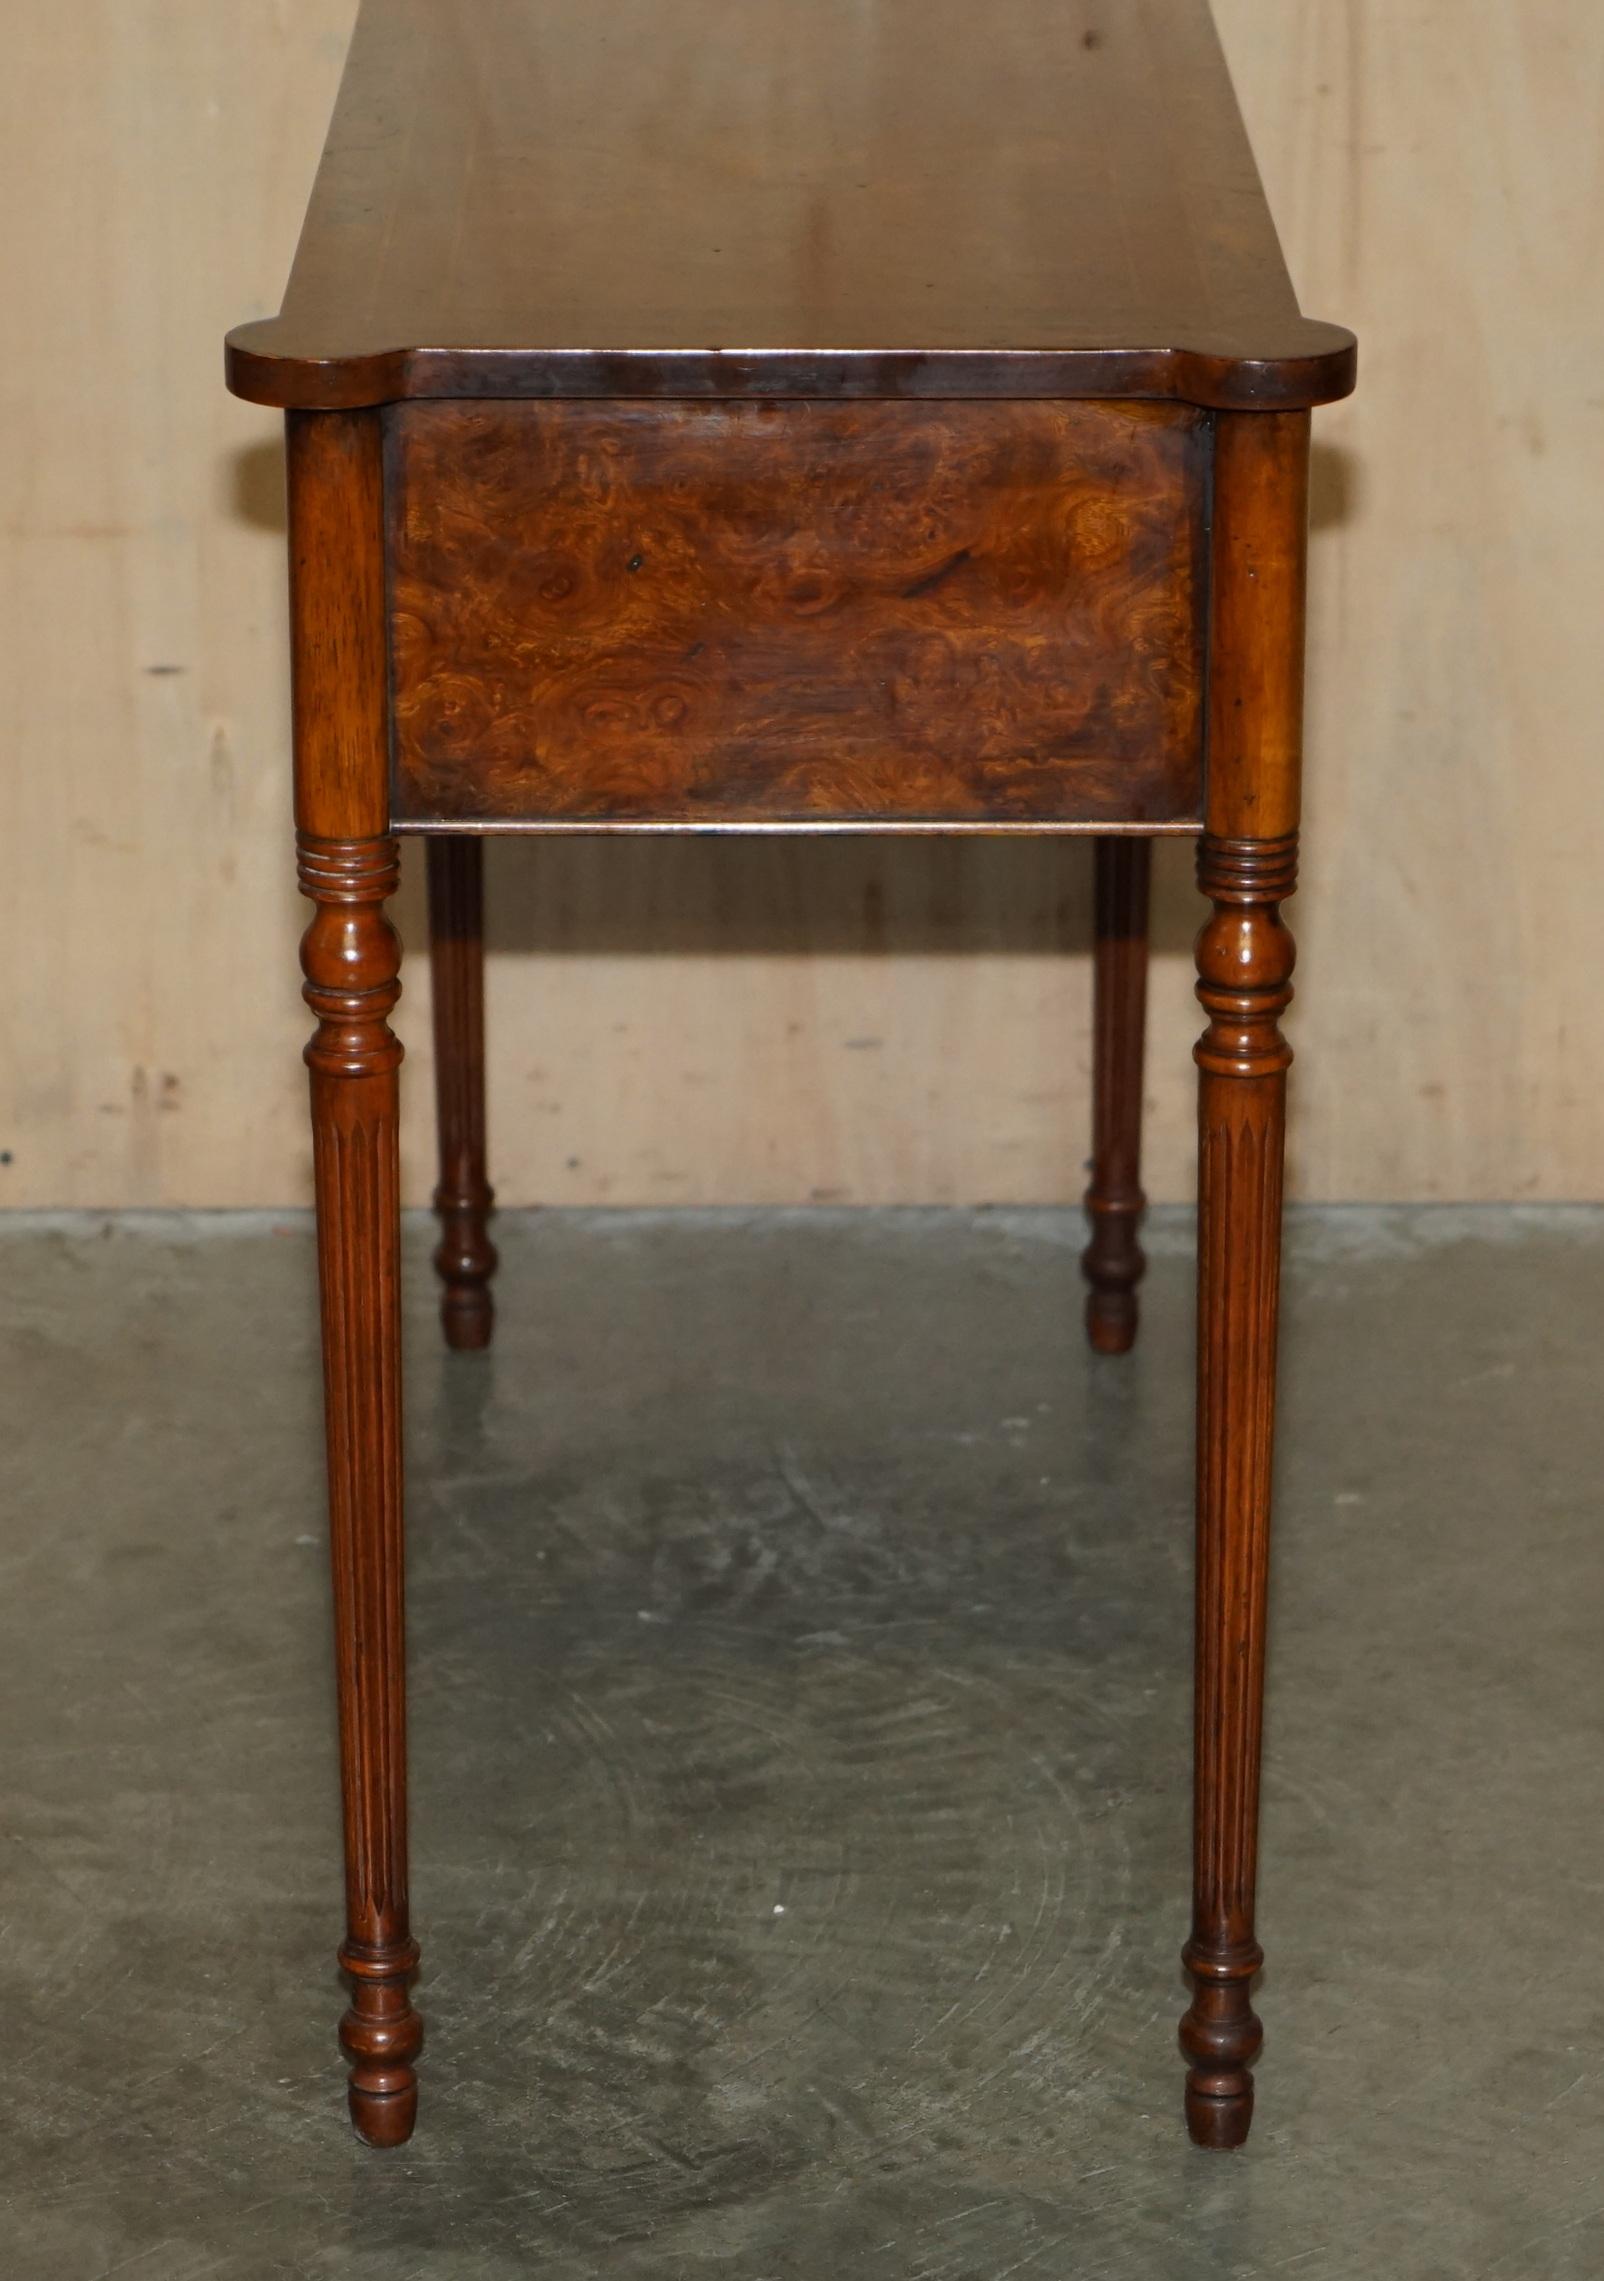 EXQUISITE CIRCA 1920 BURR ELM & SATiNWOOD FRENCH POLISHED RESTORED CONSOLE TABLE im Angebot 9